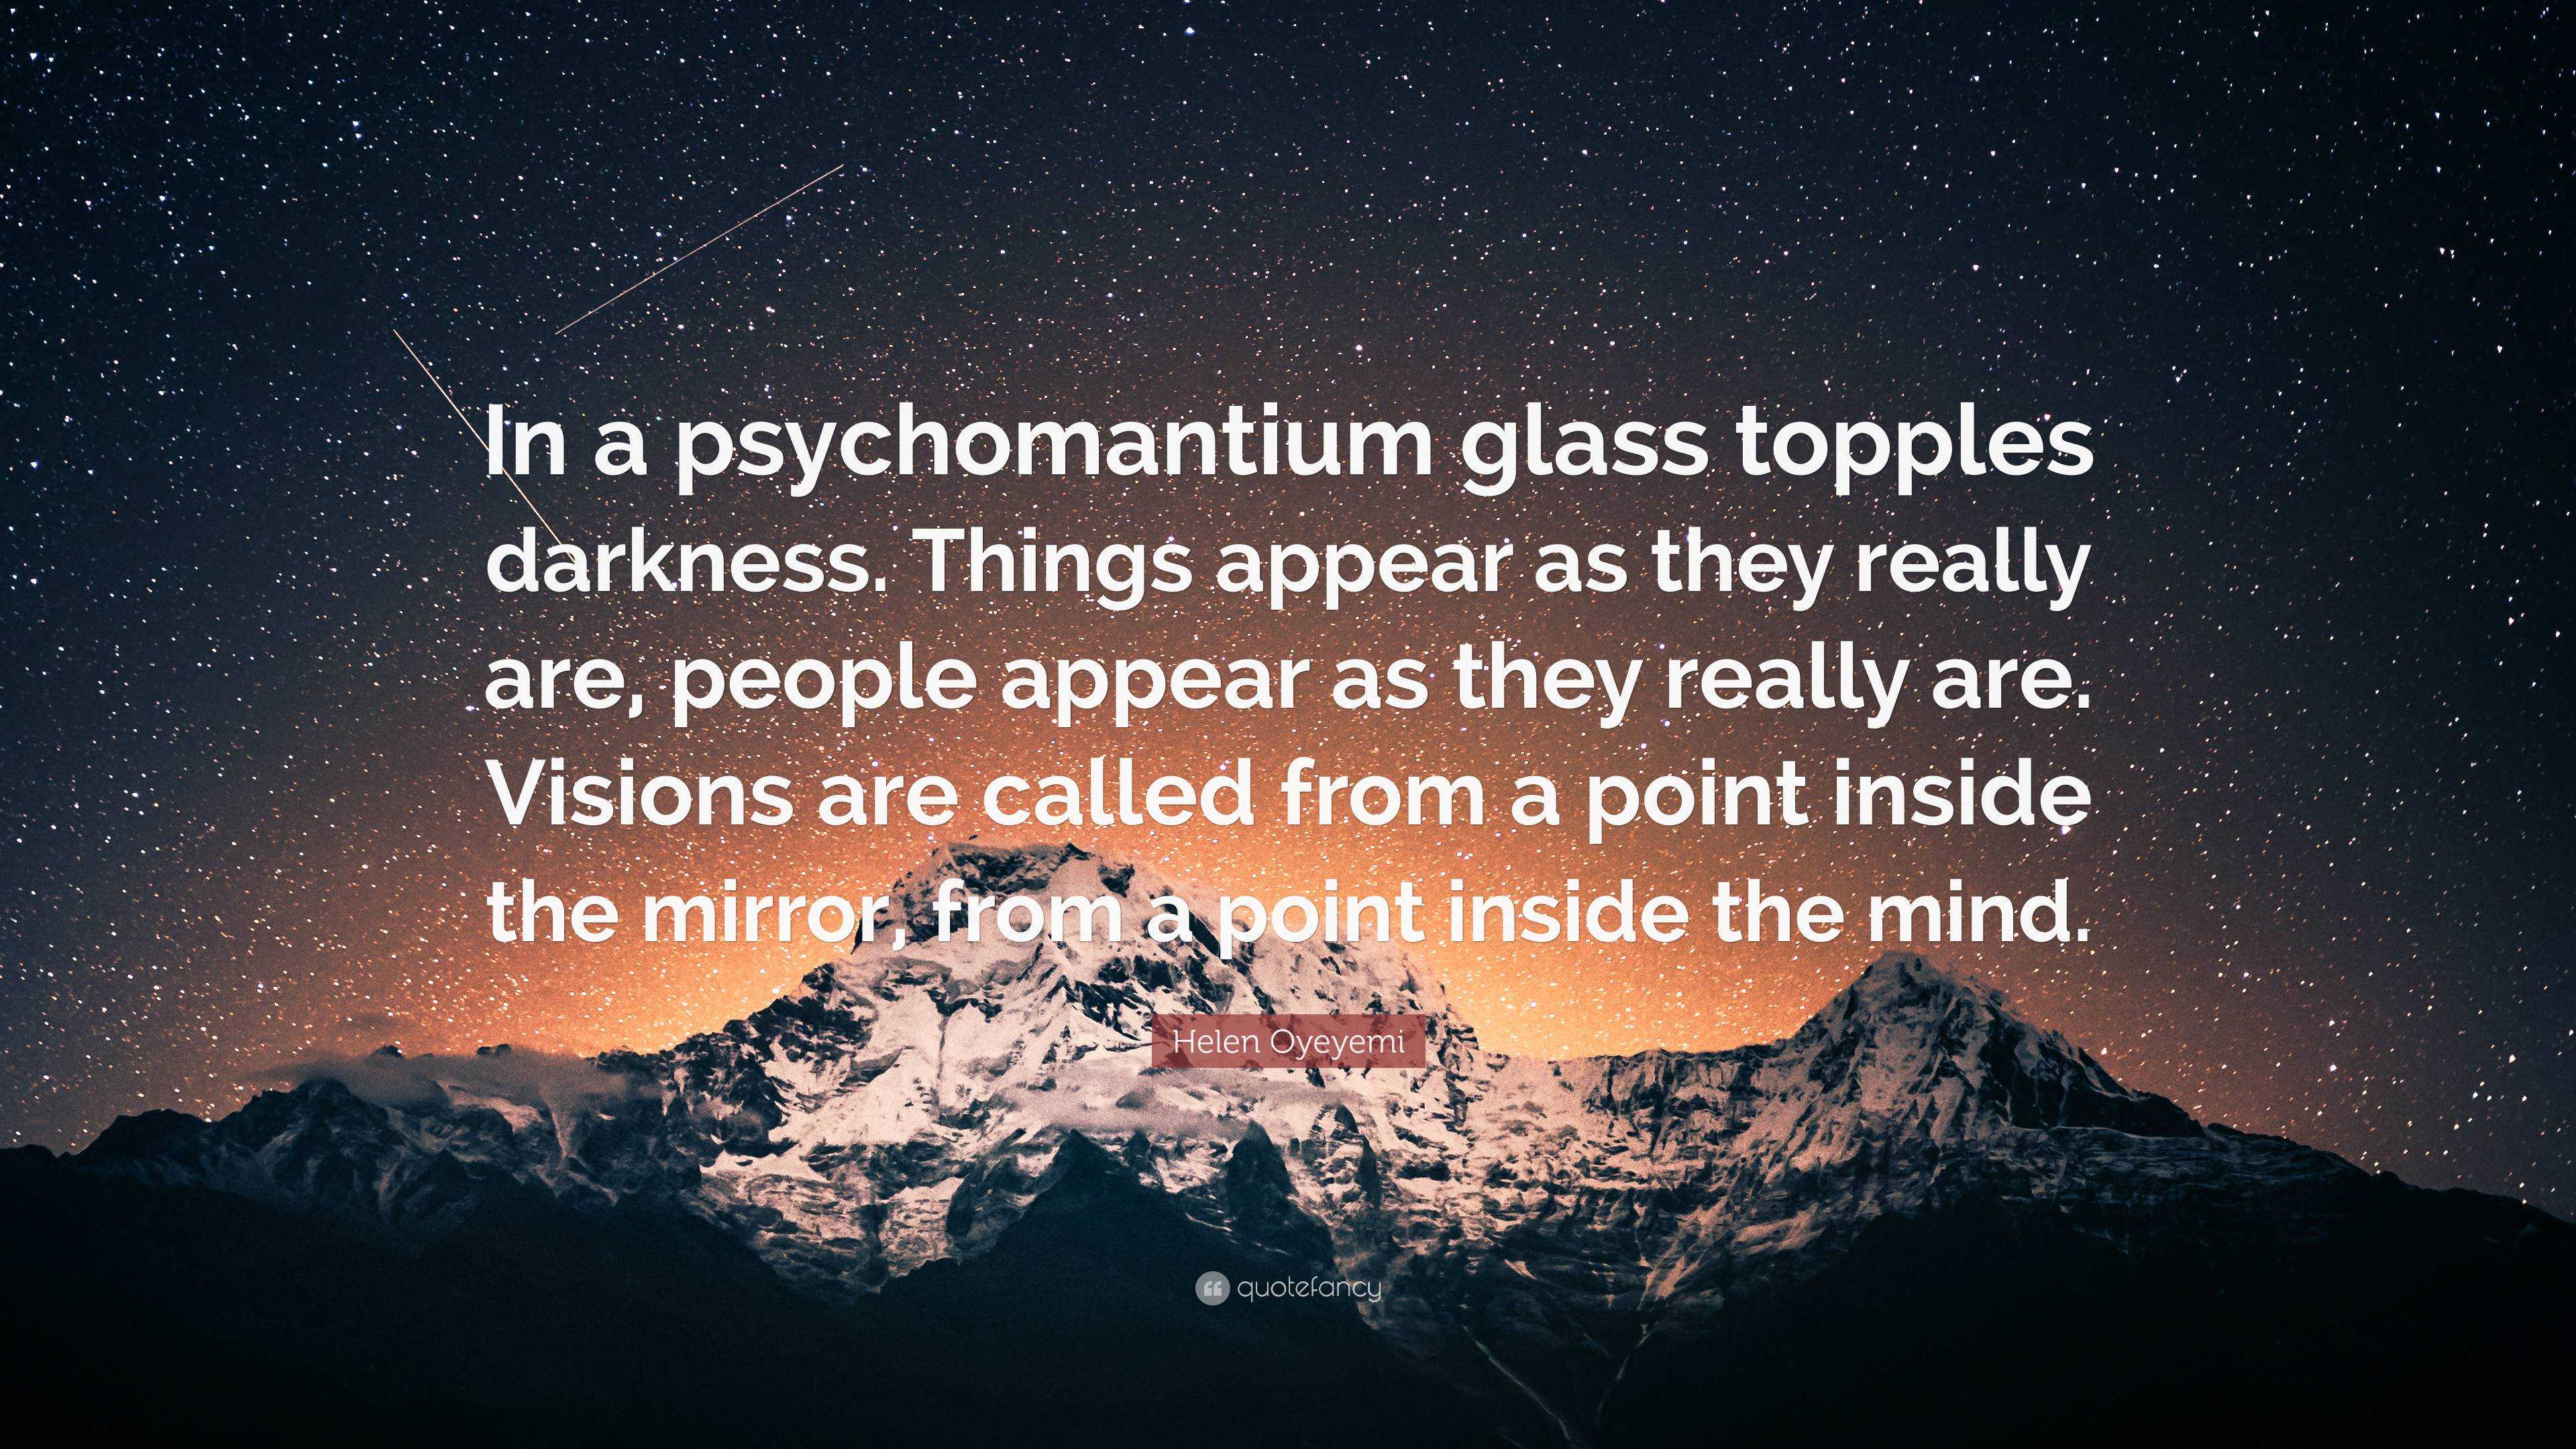 Helen Oyeyemi Quote: “In a psychomantium glass topples darkness. Things ...